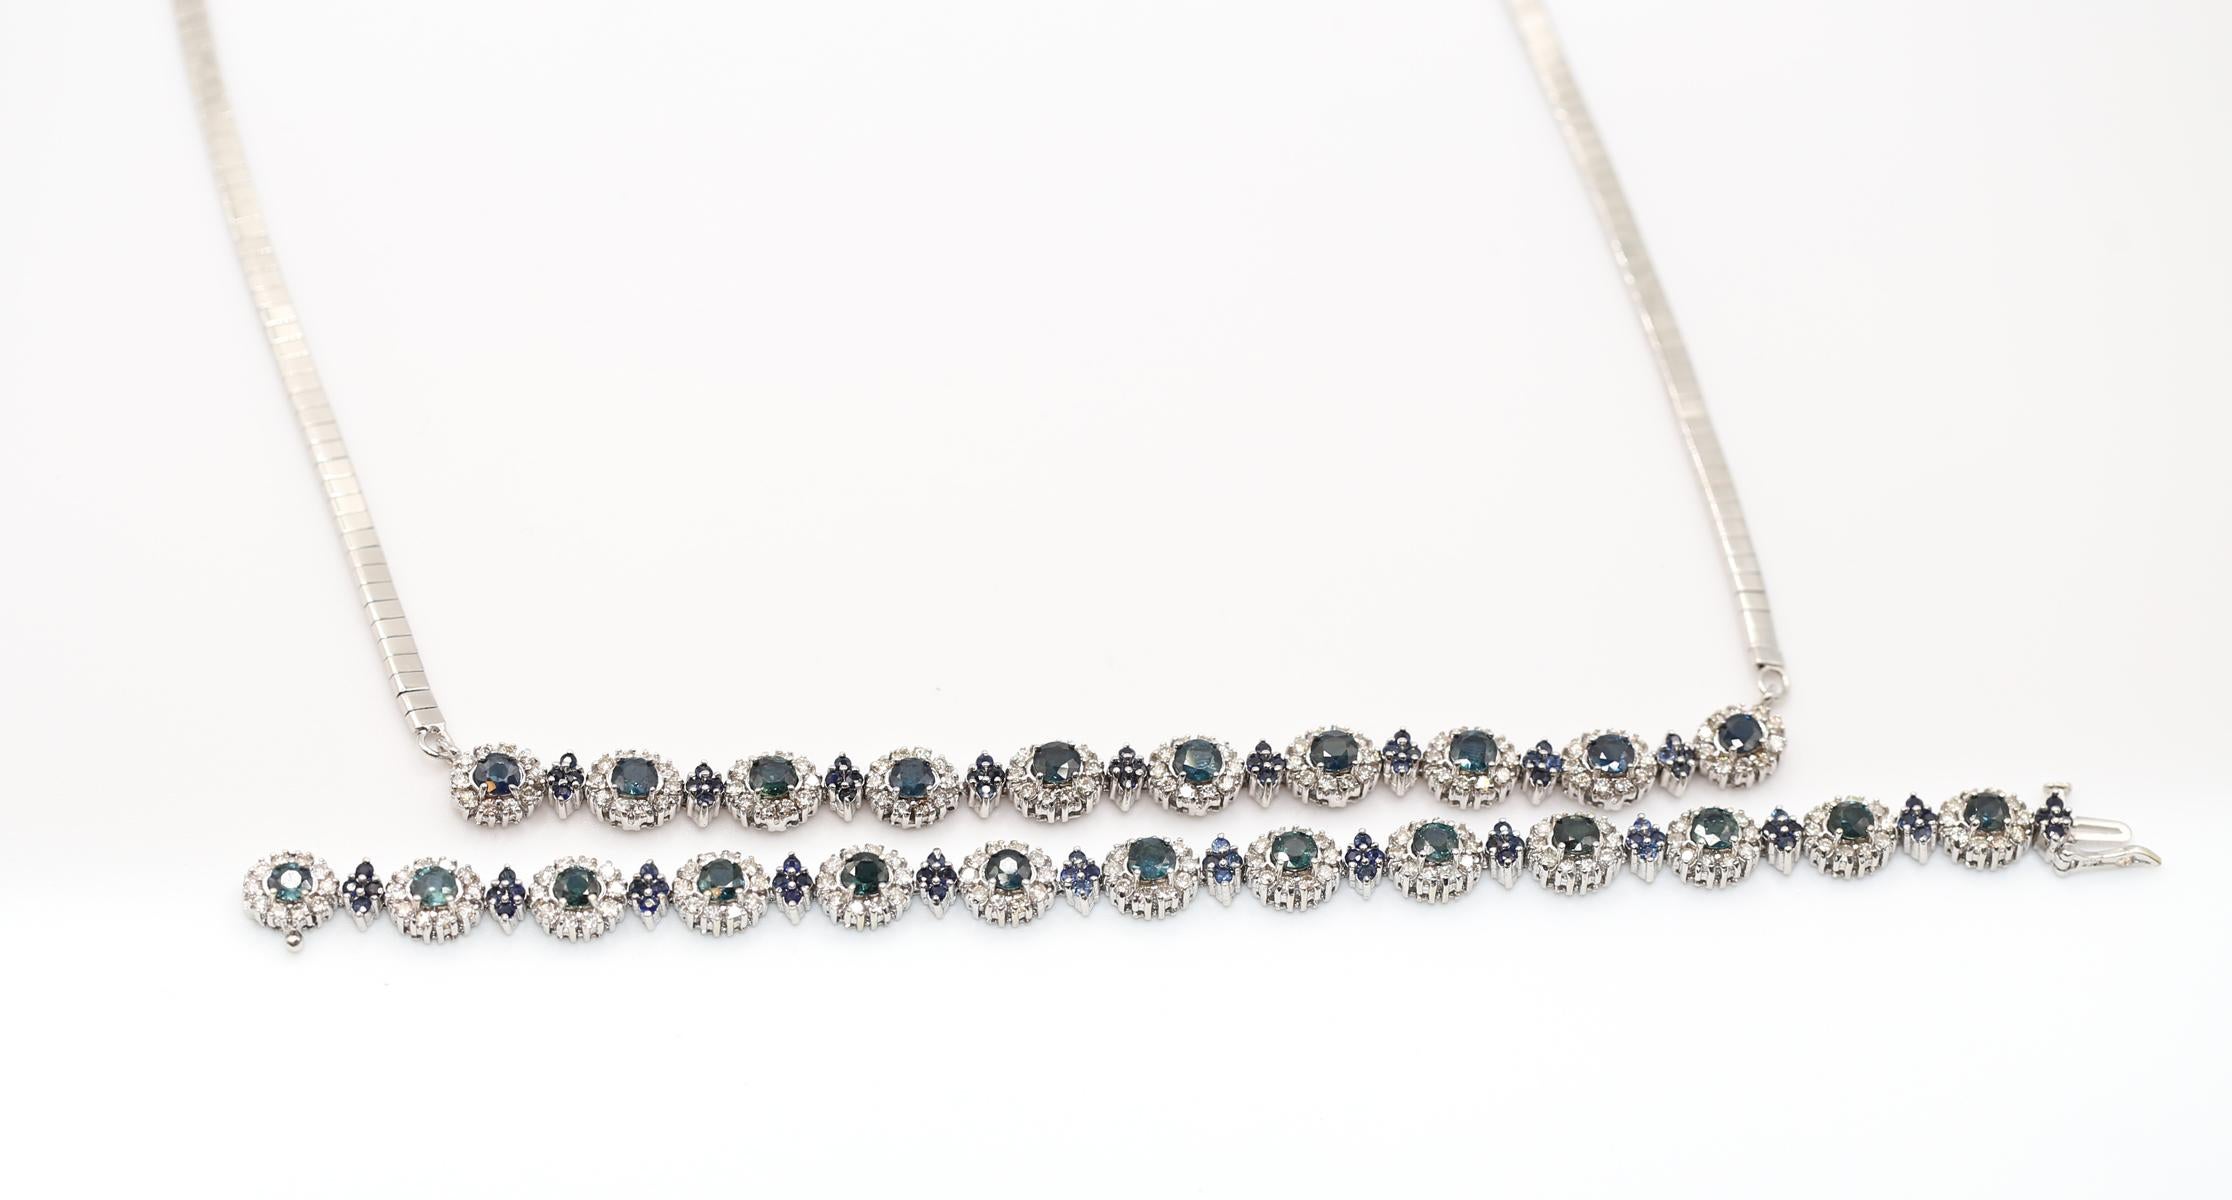 A matching set that comprises a bracelet and a necklace.
Round-cut Sapphires are surrounded by a fine round cut Diamonds. Each set of stones is connected flexibly to the next. So when it is worn on the hand or on the neck the whole jewelry item is